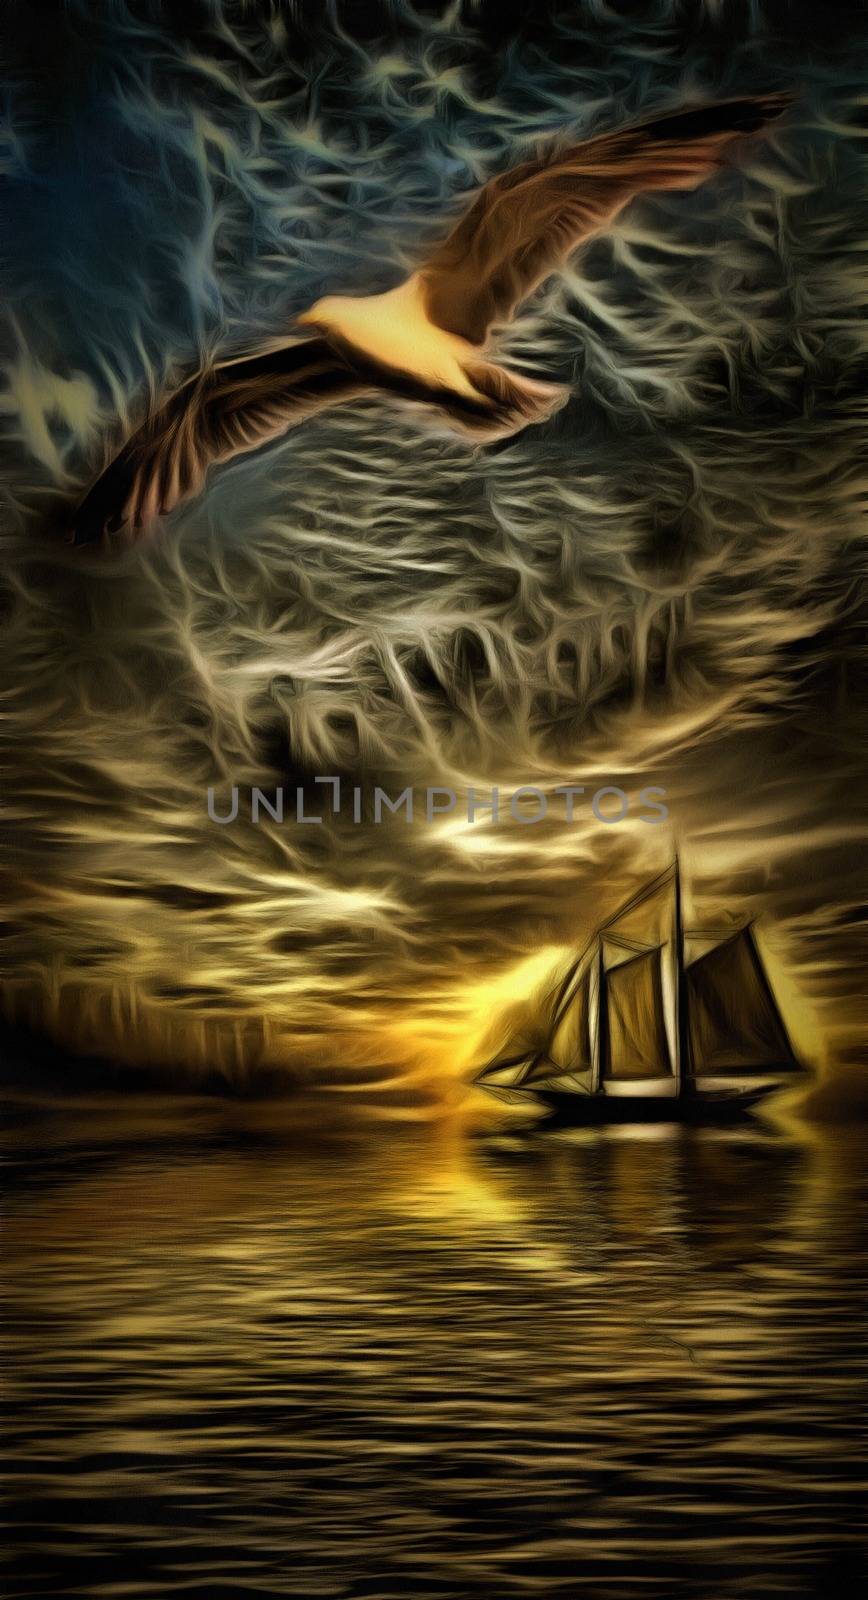 Oil painting. Thunderbird in the sky. Sailing ship. 3D rendering